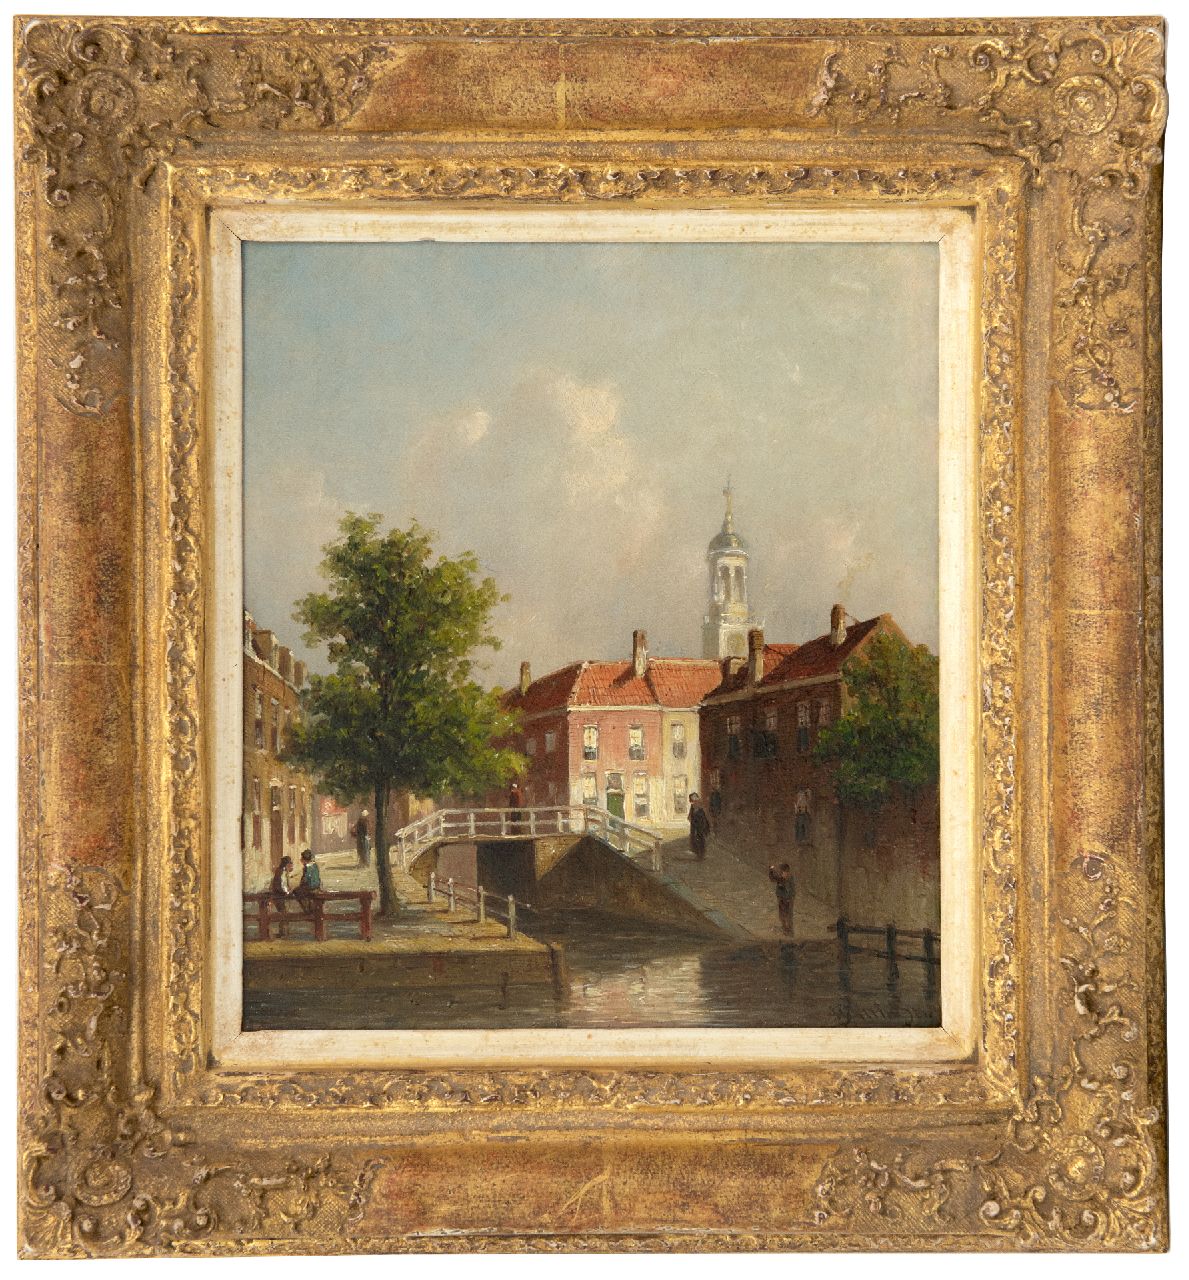 Vertin P.G.  | Petrus Gerardus Vertin | Paintings offered for sale | A view of the Nieuwe Gracht, corner Jansstraat, Haarlem, oil on panel 23.6 x 20.8 cm, signed l.r.